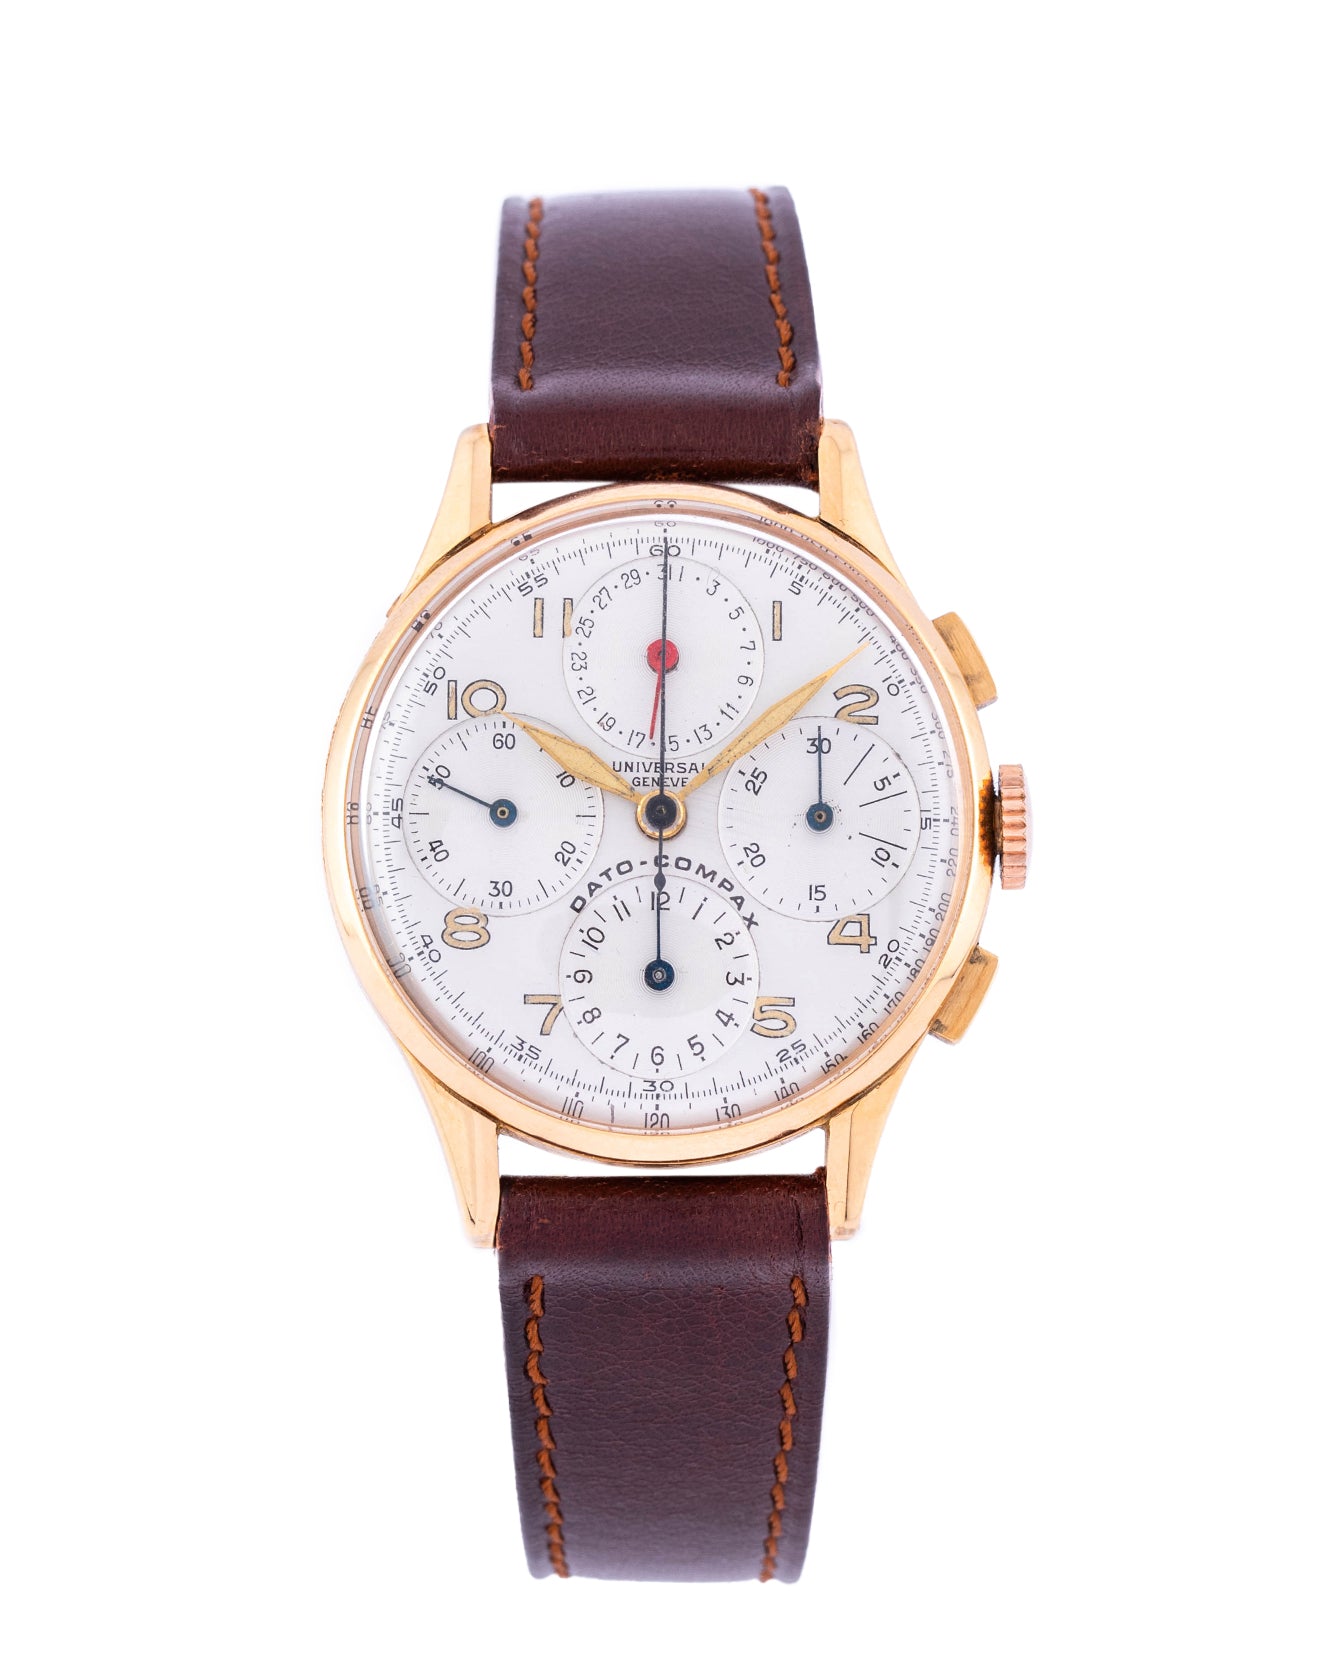 Universal Genève Dato – Compax in yellow gold and white dial 